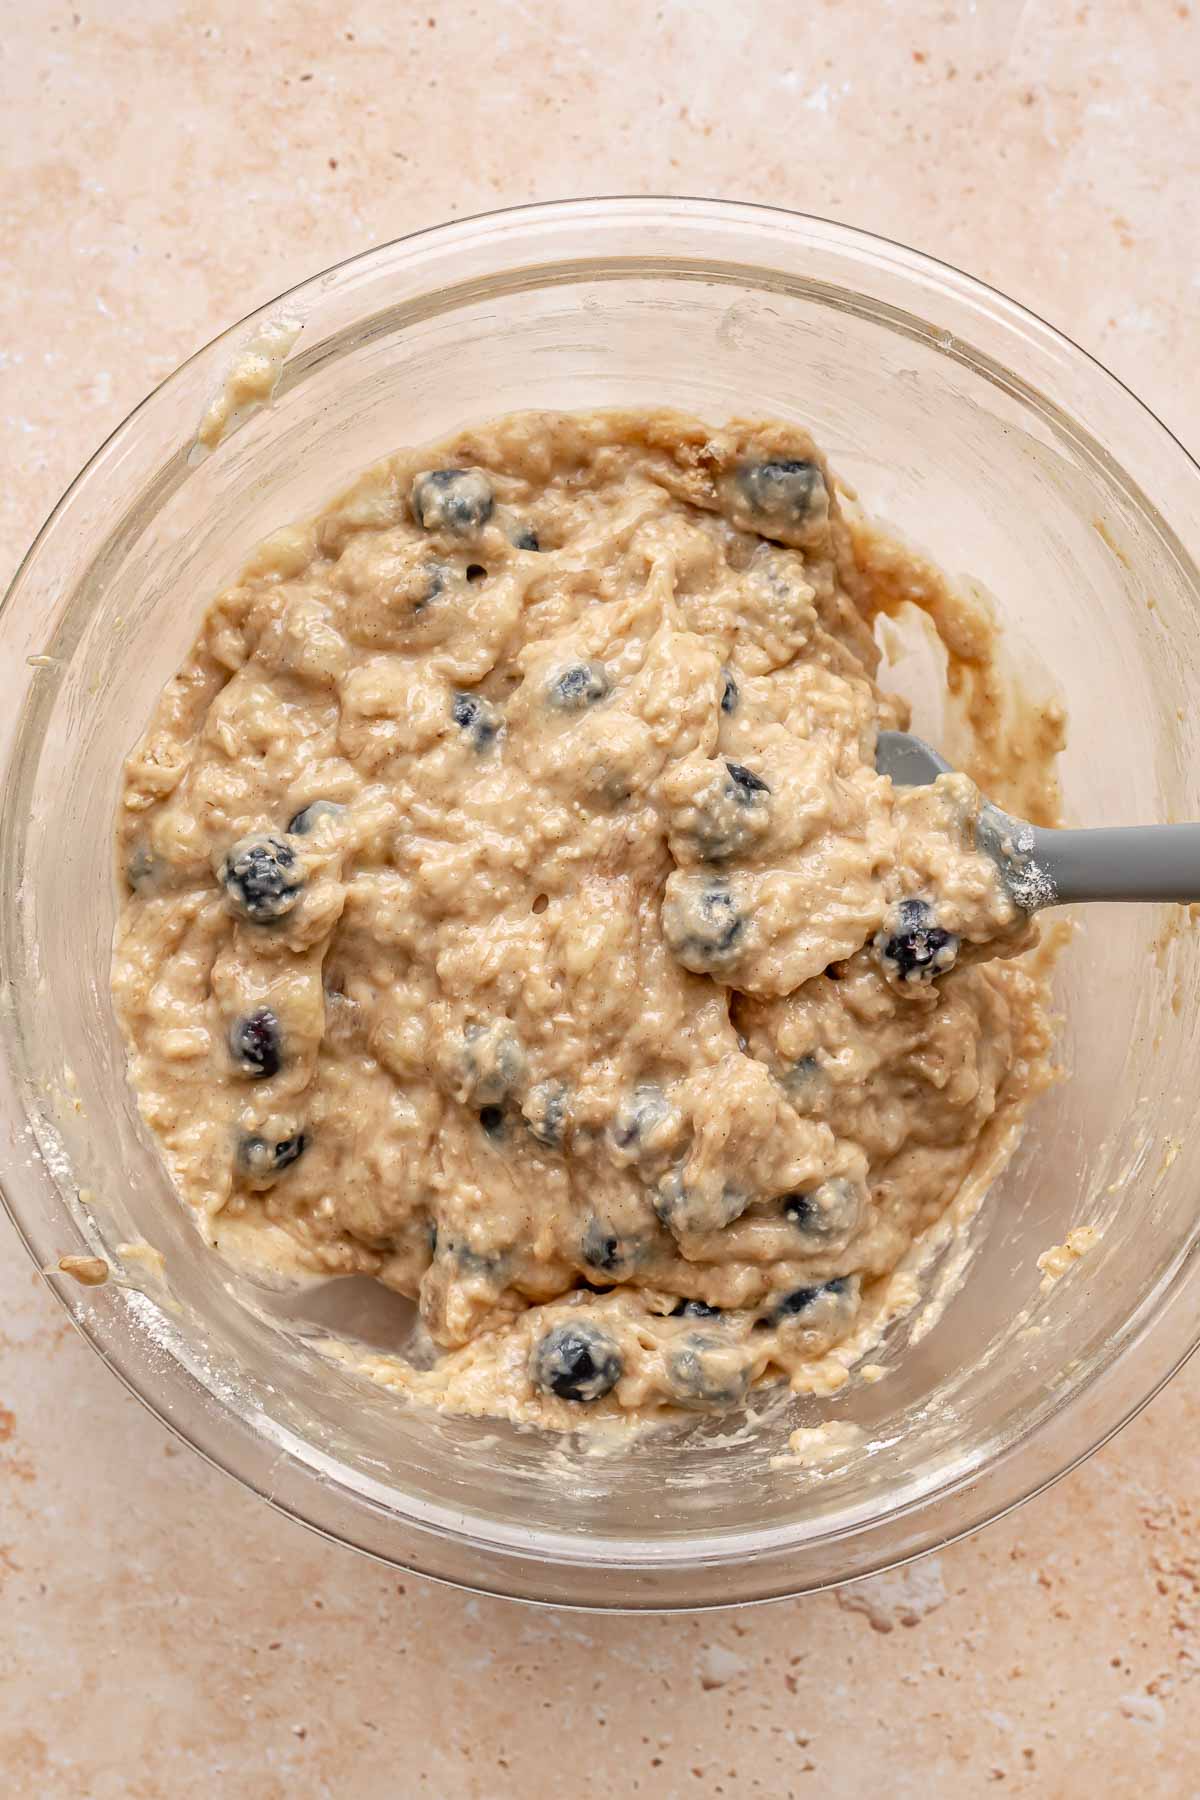 A spatula folds blueberries into muffin batter.